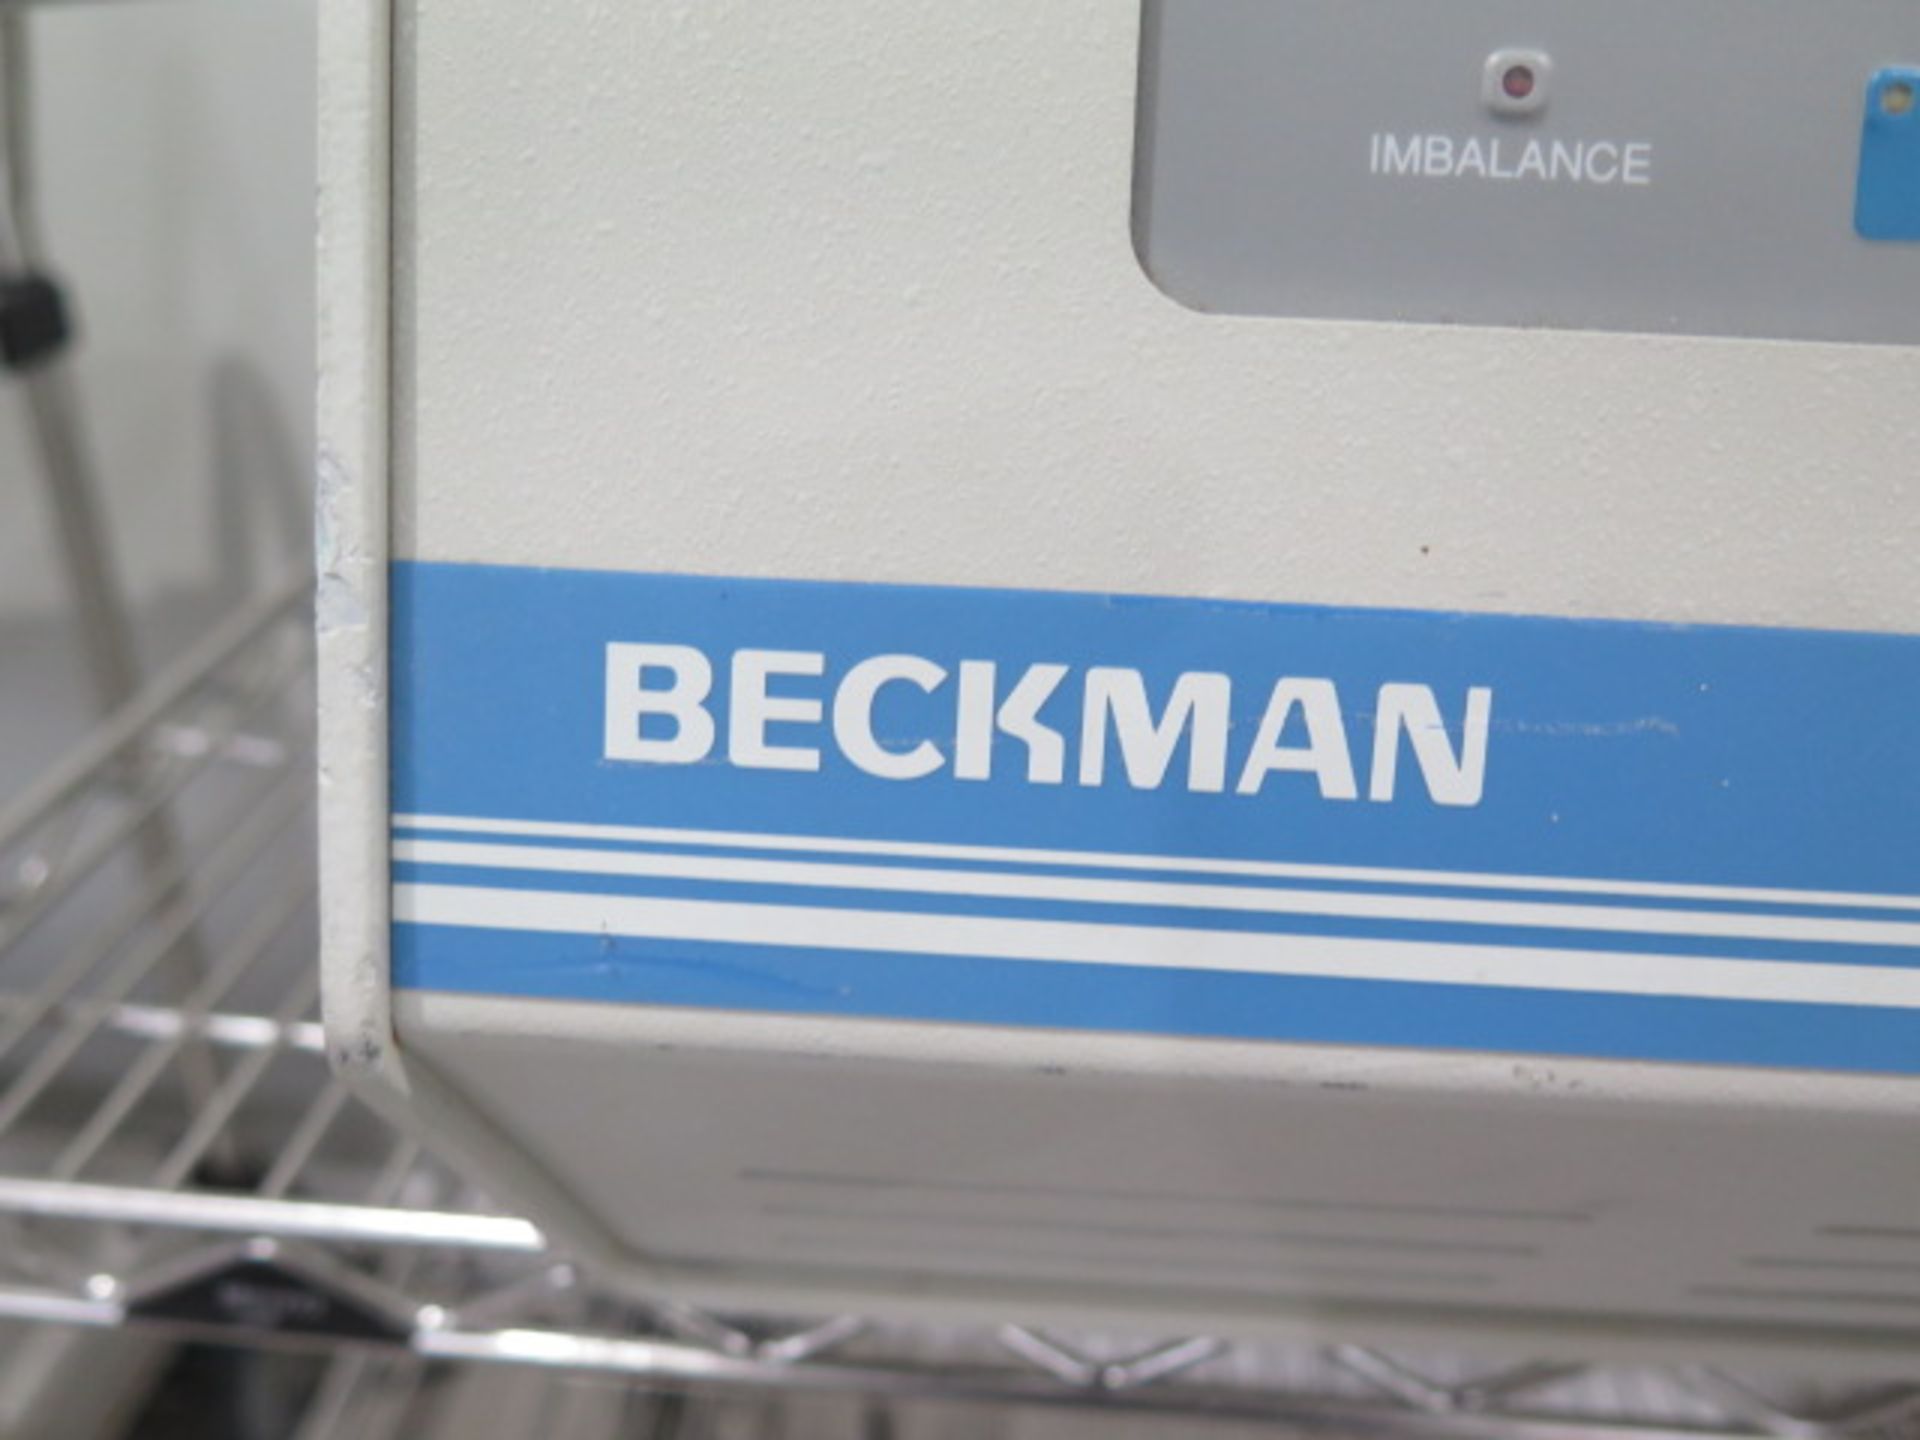 Beckman GS-15R Refrigerated Centrifuge s/n GGB96K01 (SOLD AS-IS - NO WARRANTY) - Image 7 of 9